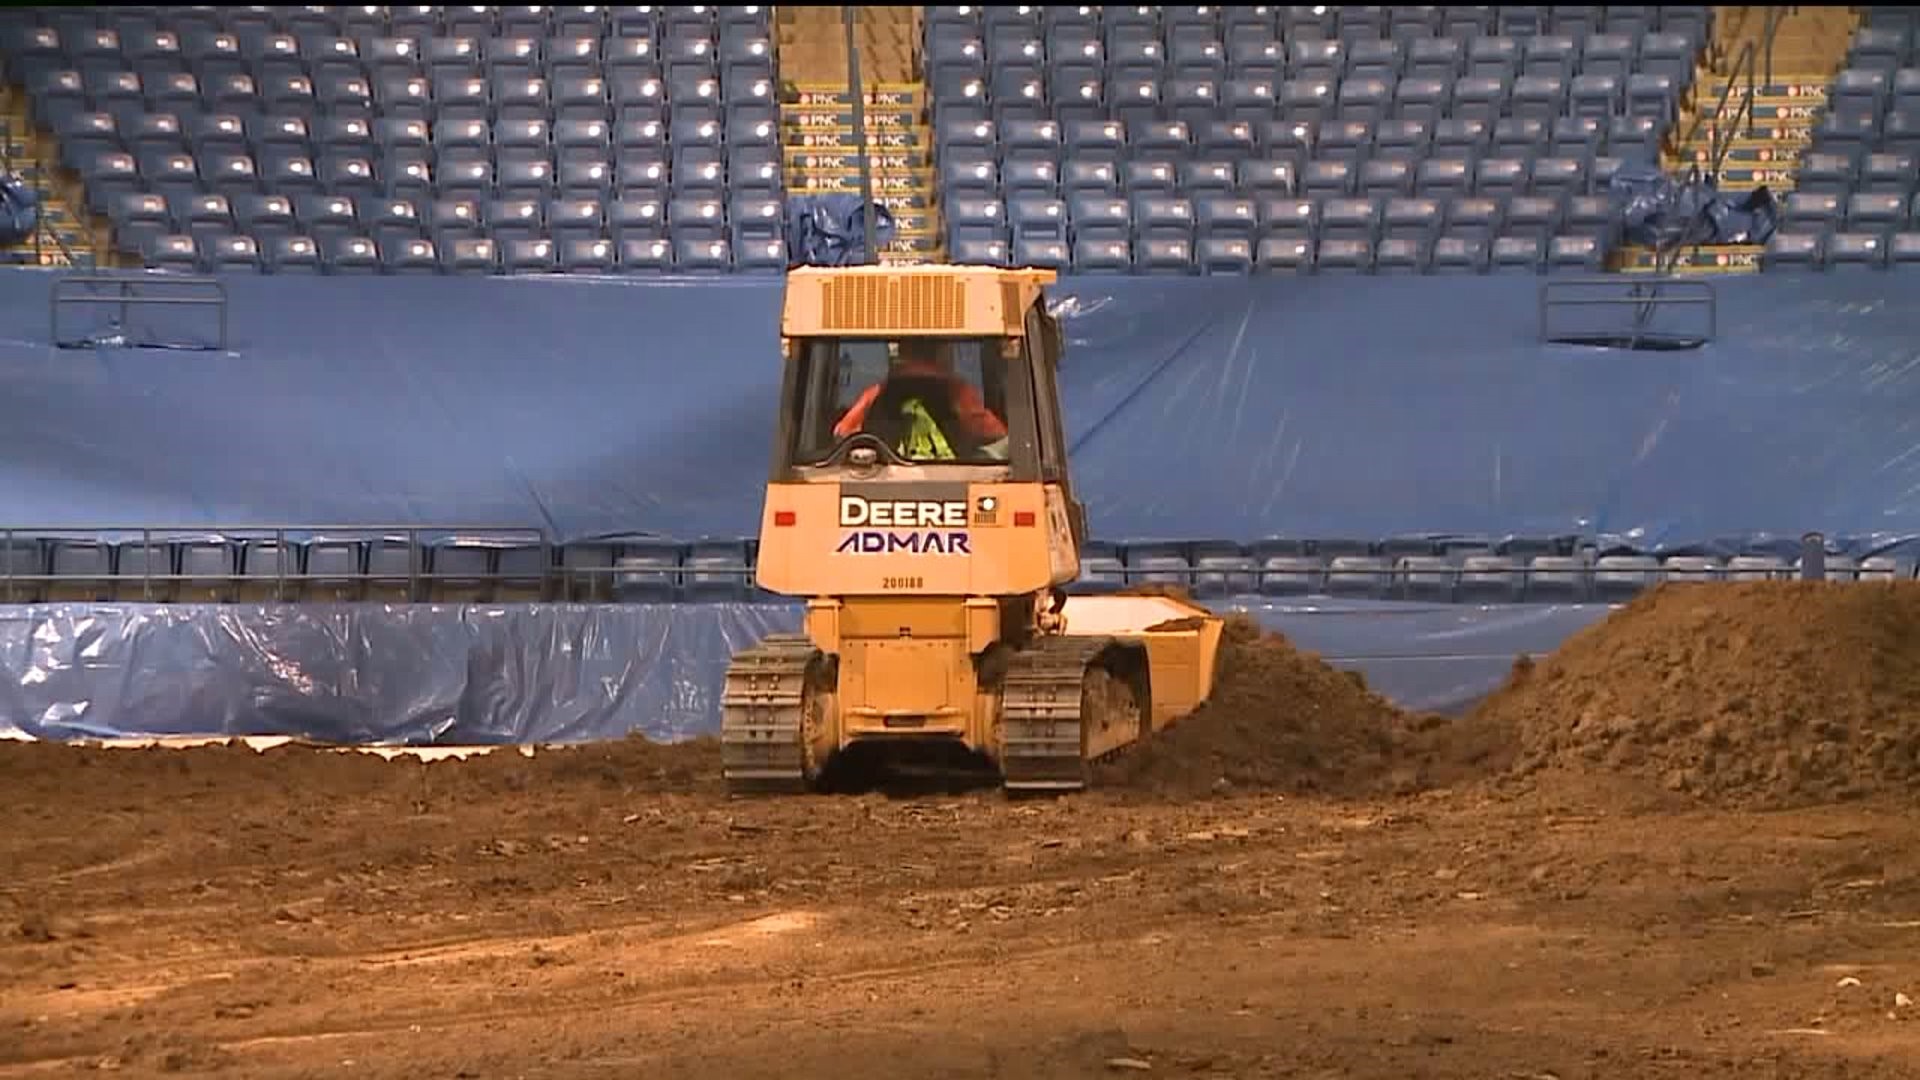 Ice Is Out, Dirt Is In at Mohegan Sun Arena